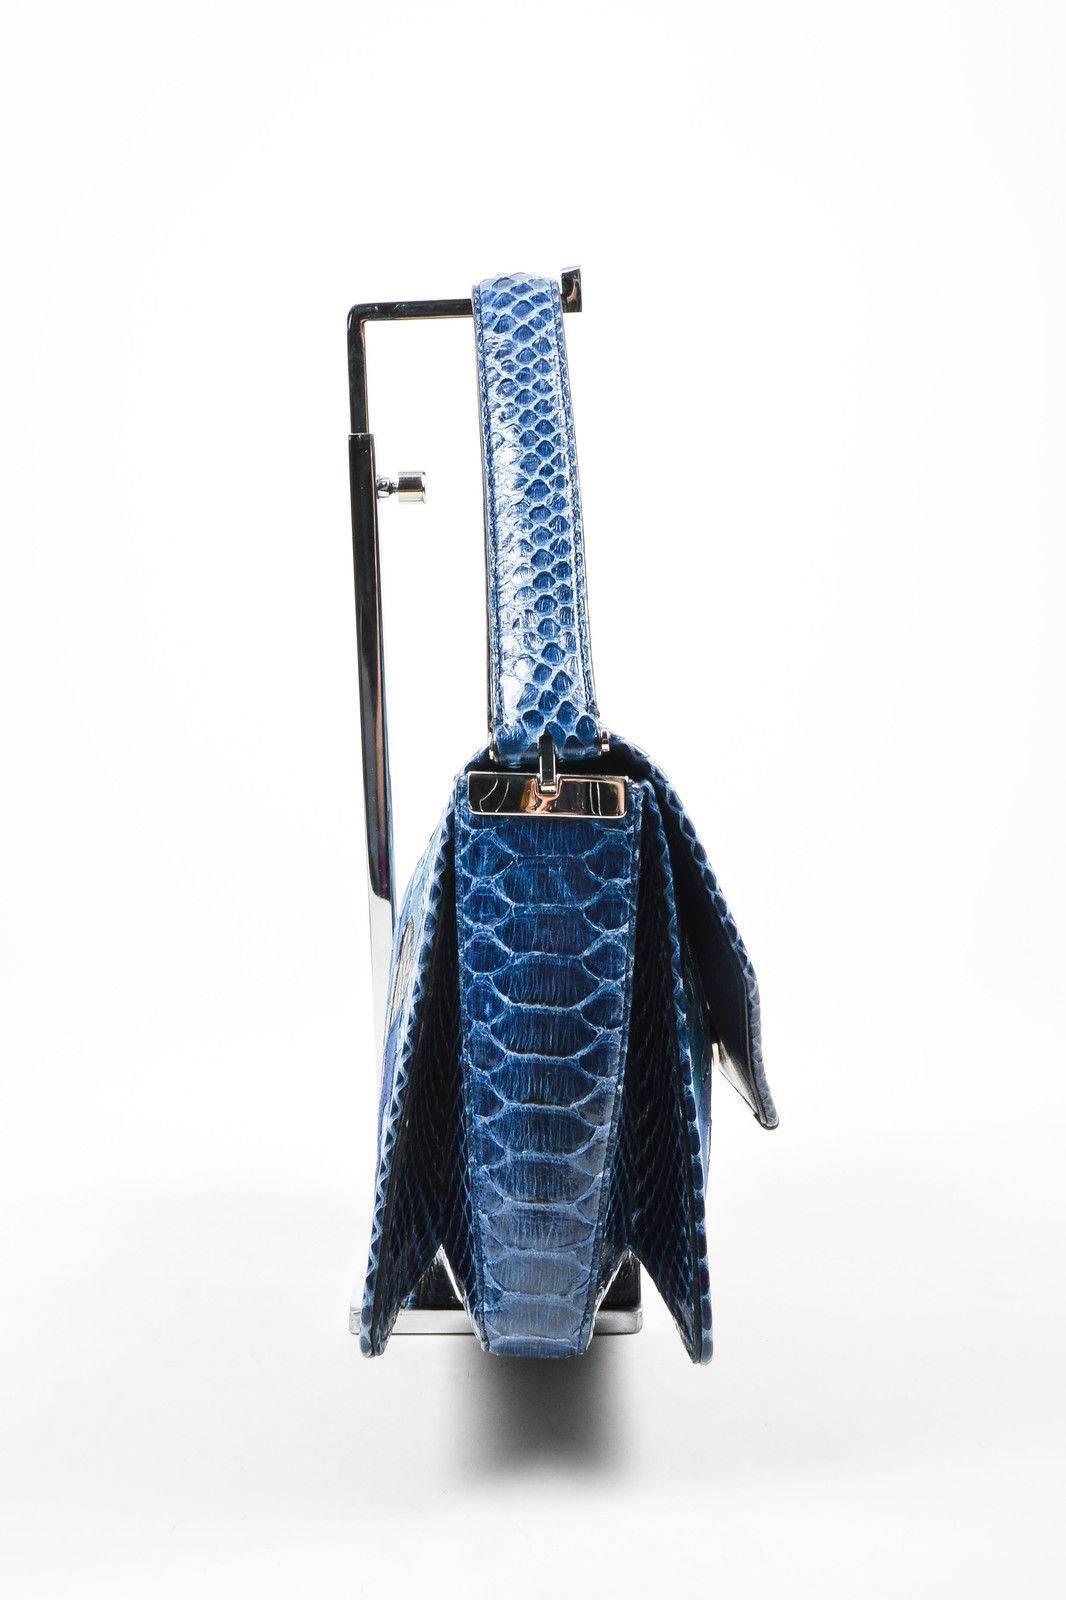 Mixed media handbag is constructed of luxurious leather, suede, and snakeskin. Shades of blue and black throughout, with silver-tone metal hardware. Unique and innovative collapsing strap allows for a transition from handbag to shoulder bag. Top